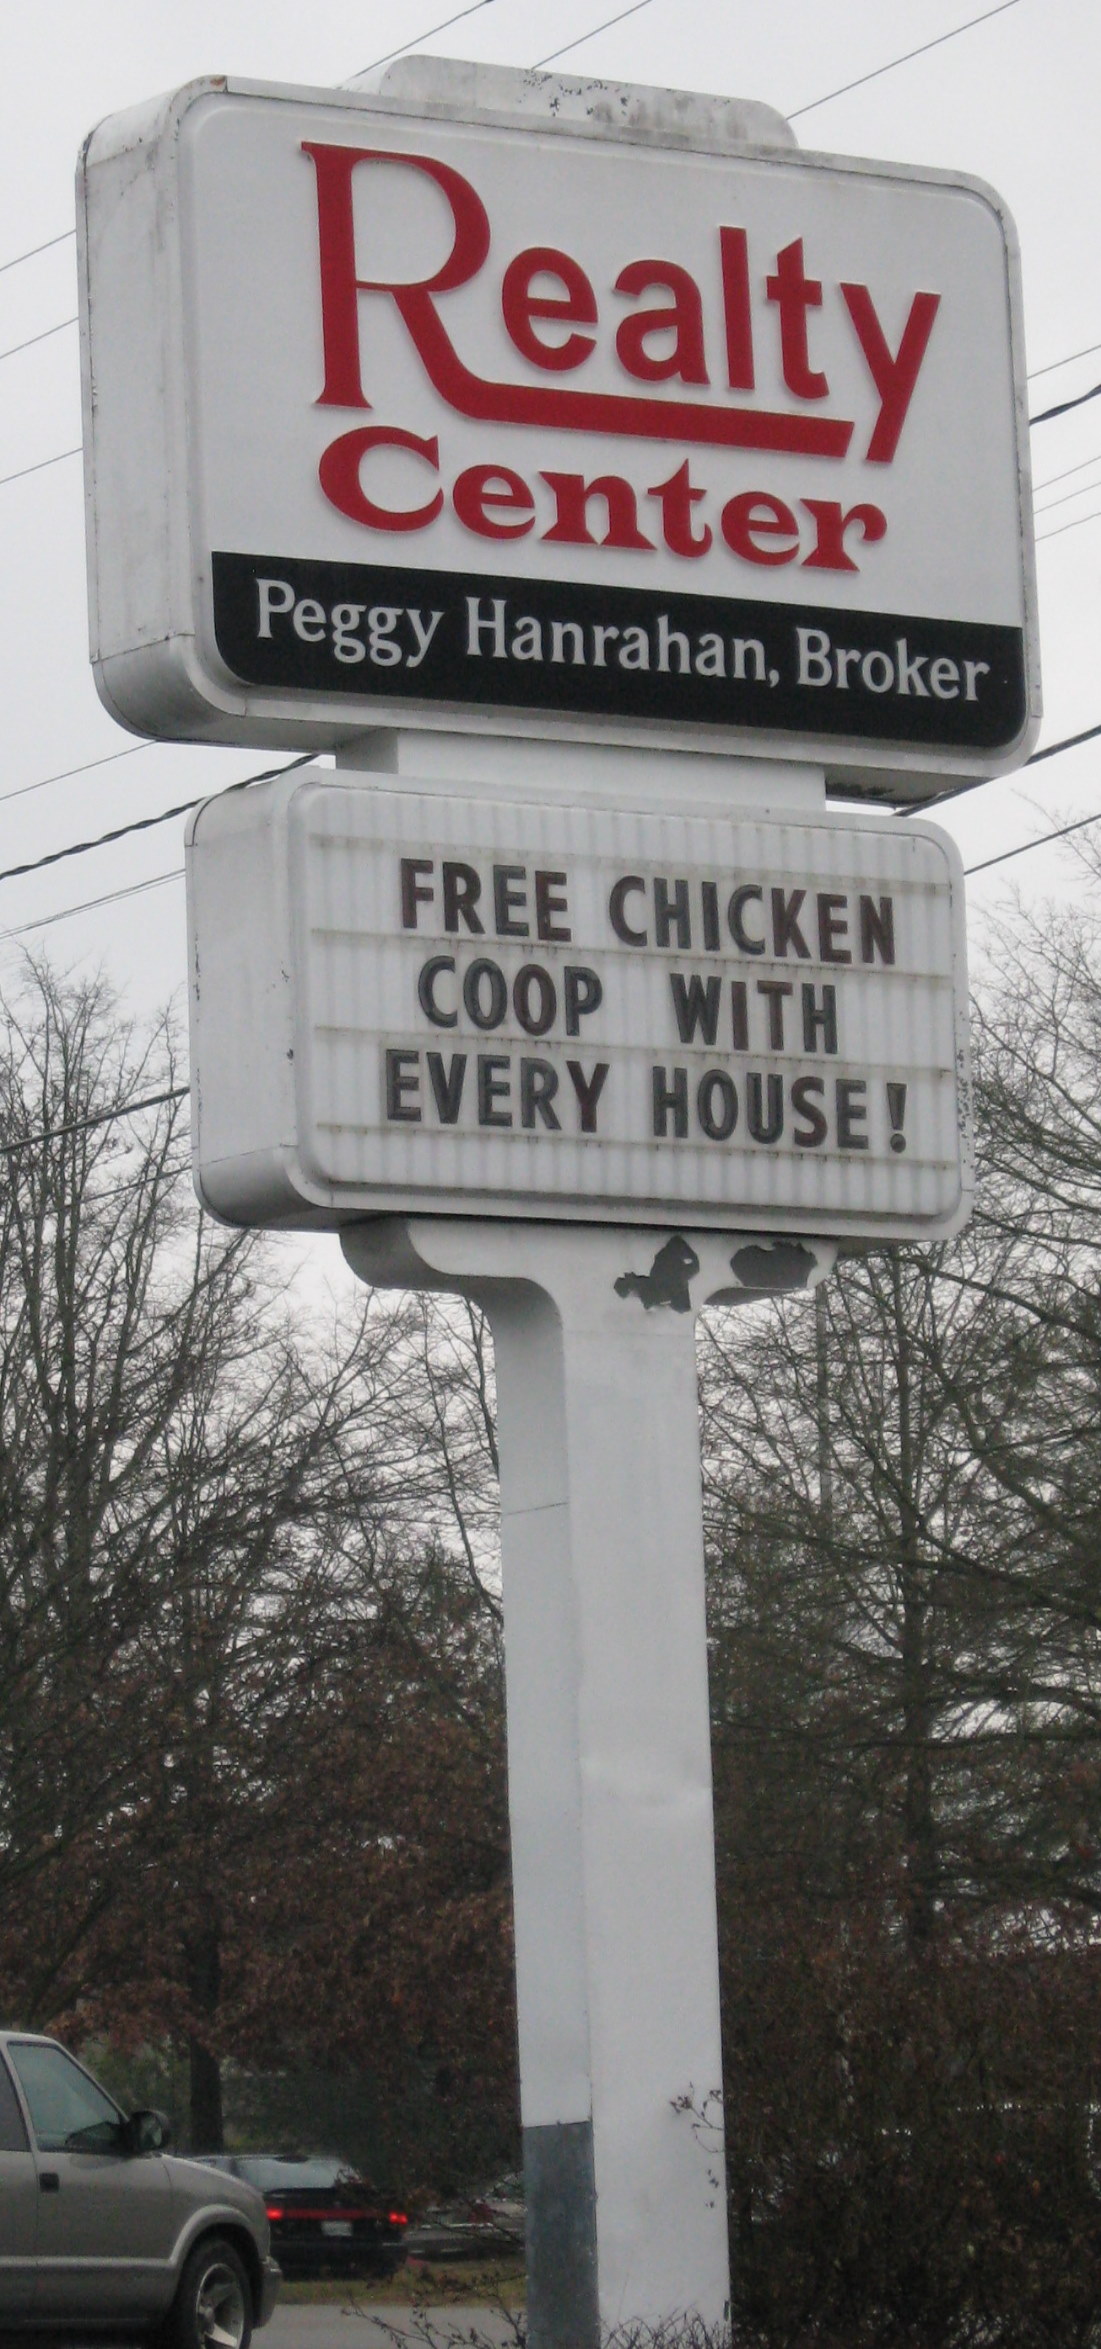 Sign at Peggy Hanrahans Realty Center promoting a chicken coop with every home sale